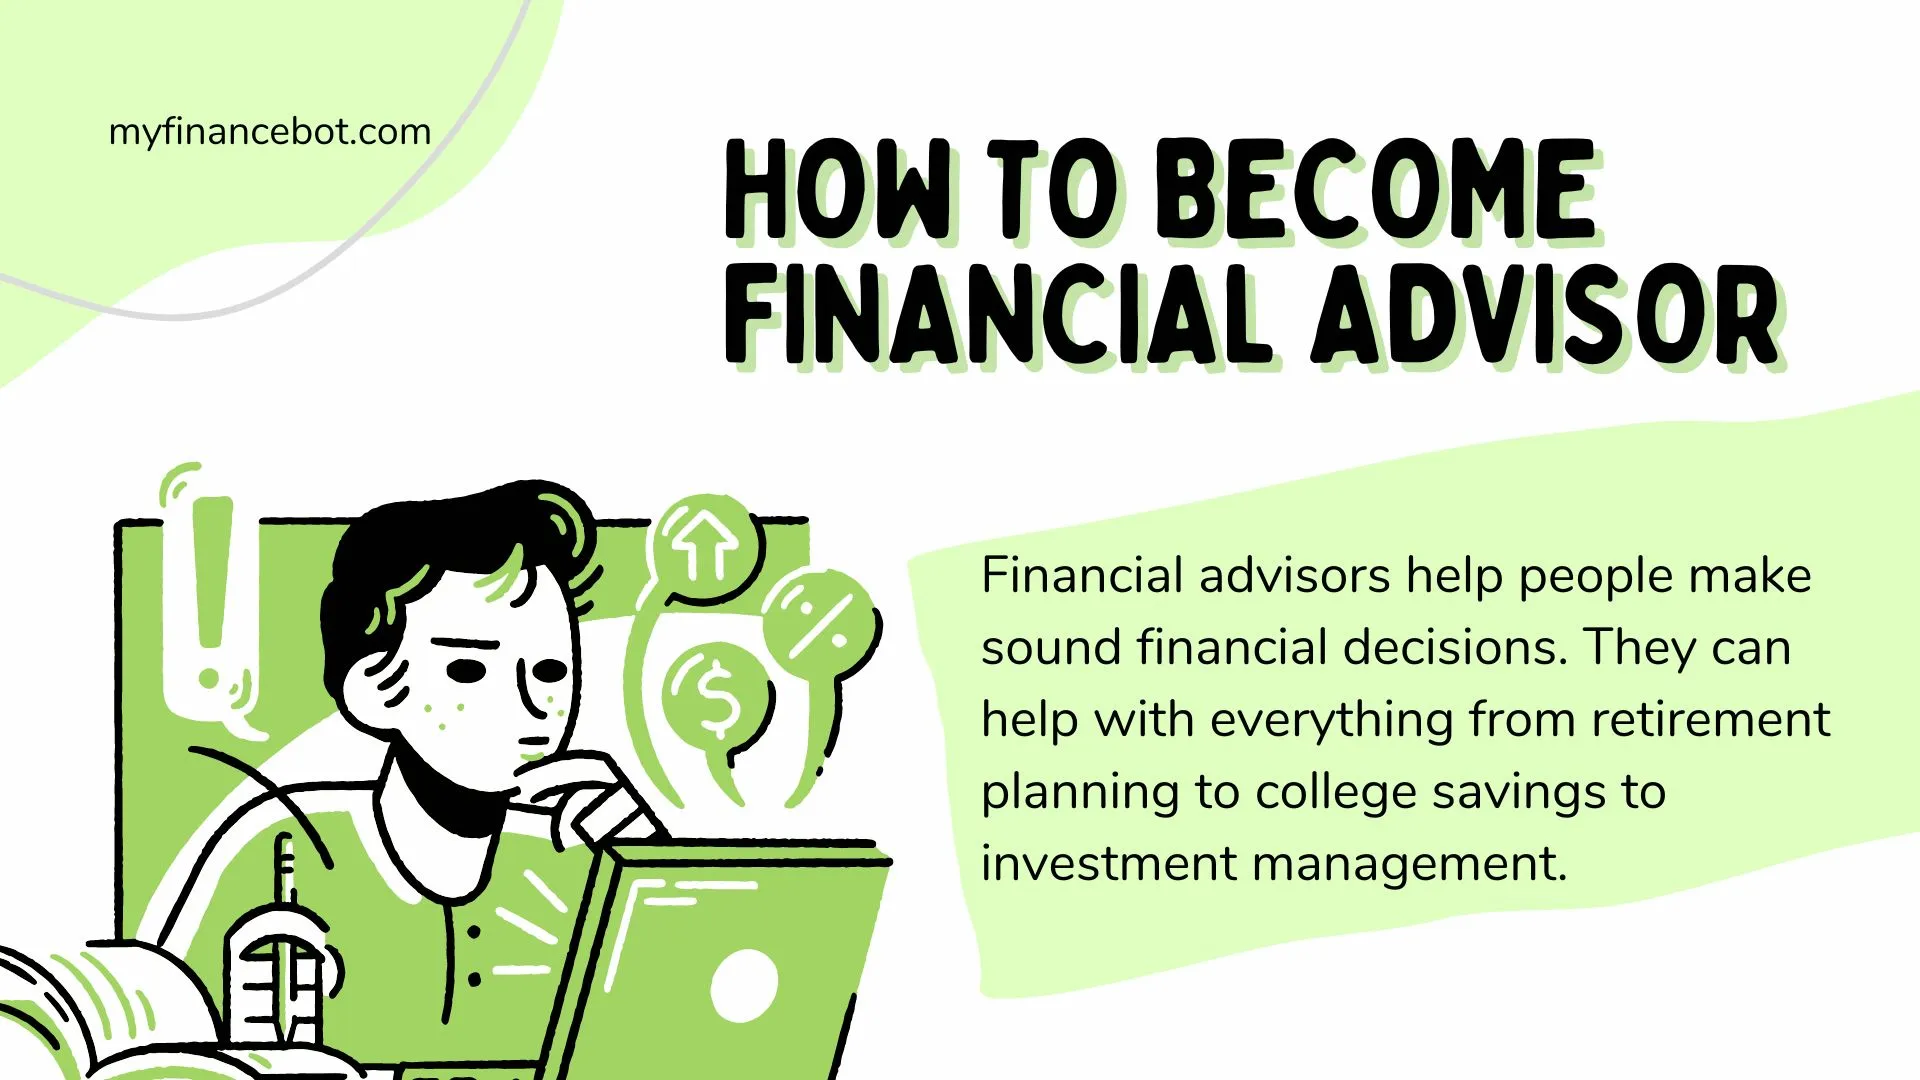 How To Become A Financial Advisor - My Finance Bot